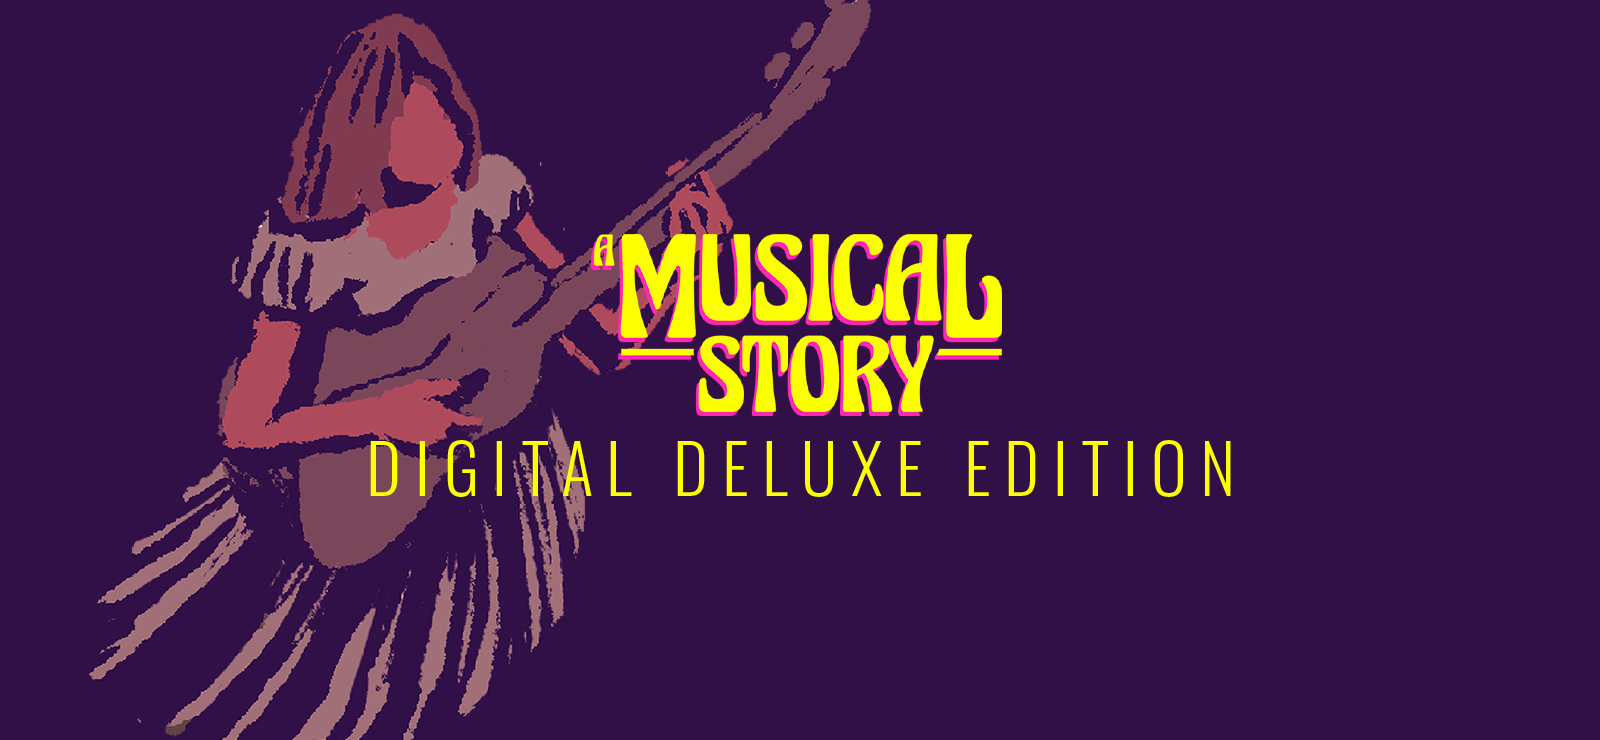 A Musical Story Digital Deluxe Version